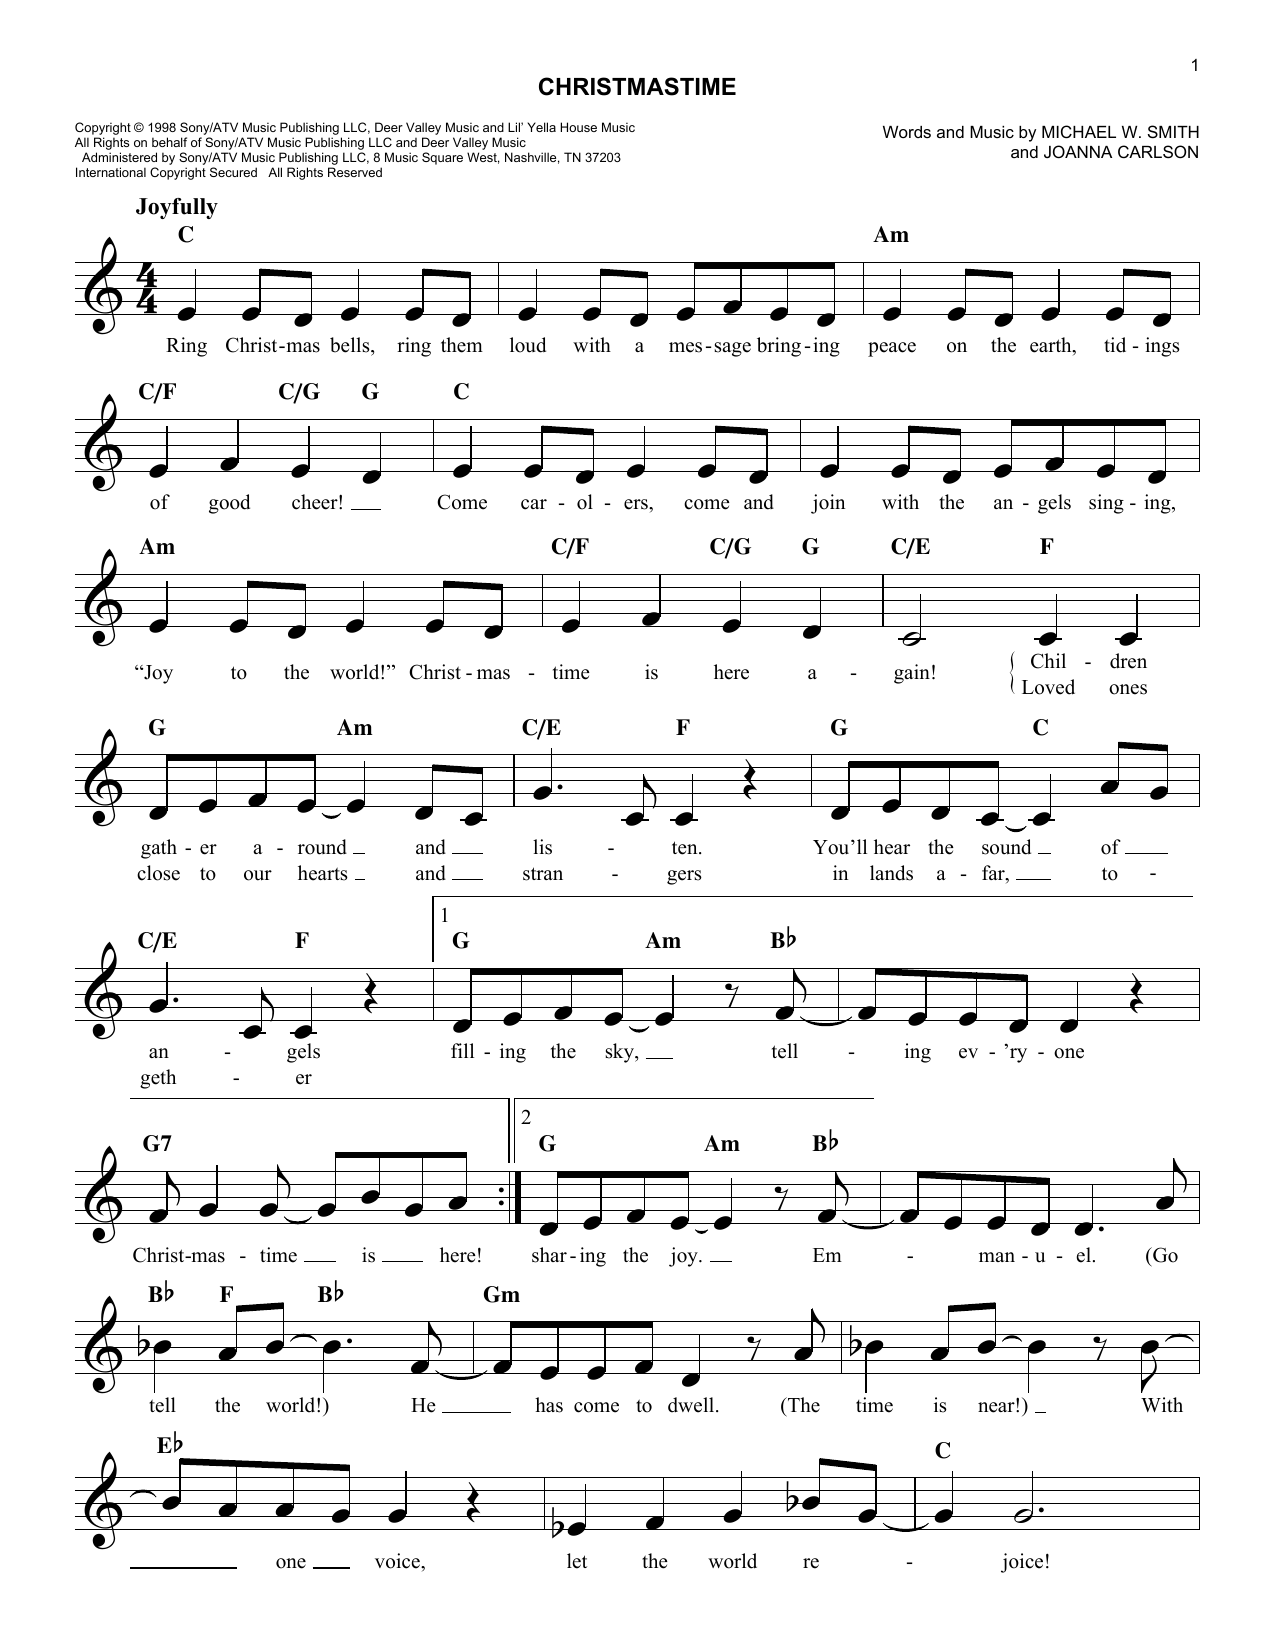 Download Michael W. Smith Christmastime Sheet Music